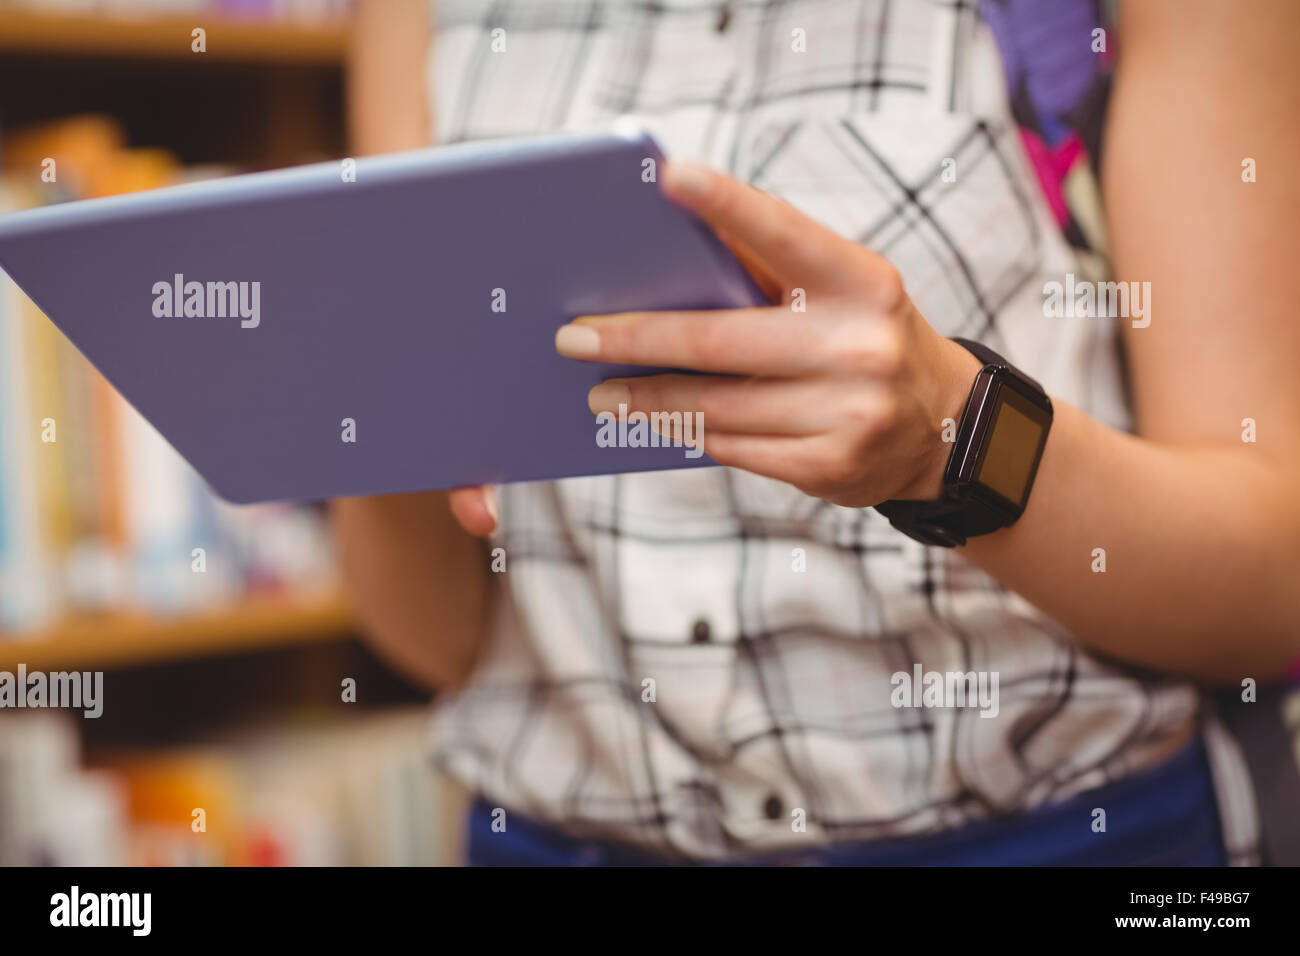 Midsection of student with digital tablet and smart watch Stock Photo